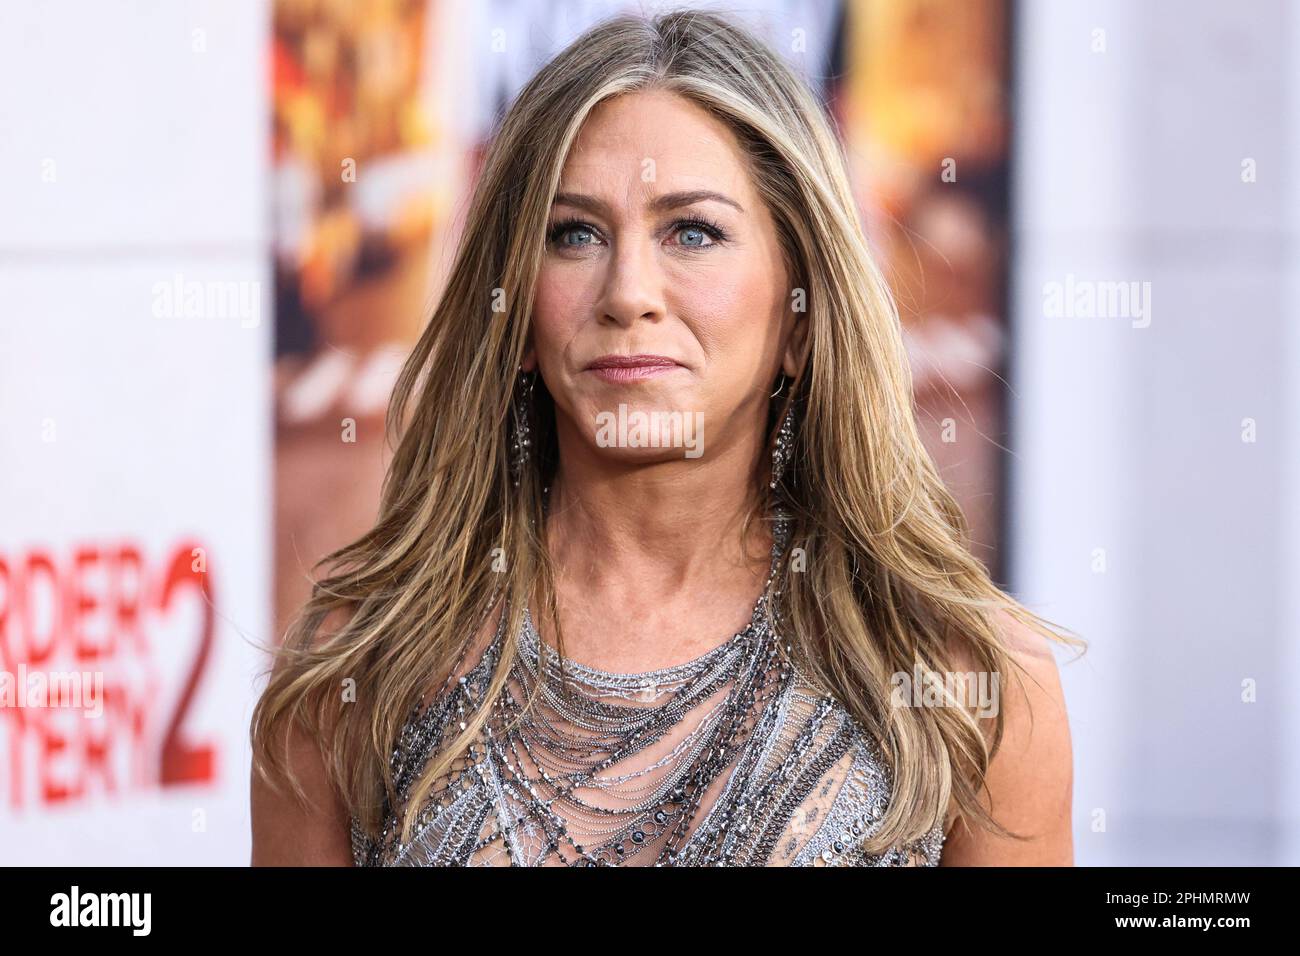 WESTWOOD, LOS ANGELES, CALIFORNIA, USA - MARCH 28: American actress and producer Jennifer Aniston wearing Versace arrives at the Los Angeles Premiere Of Netflix's 'Murder Mystery 2' held at the Regency Village Theatre on March 28, 2023 in Westwood, Los Angeles, California, United States. (Photo by Xavier Collin/Image Press Agency) Stock Photo